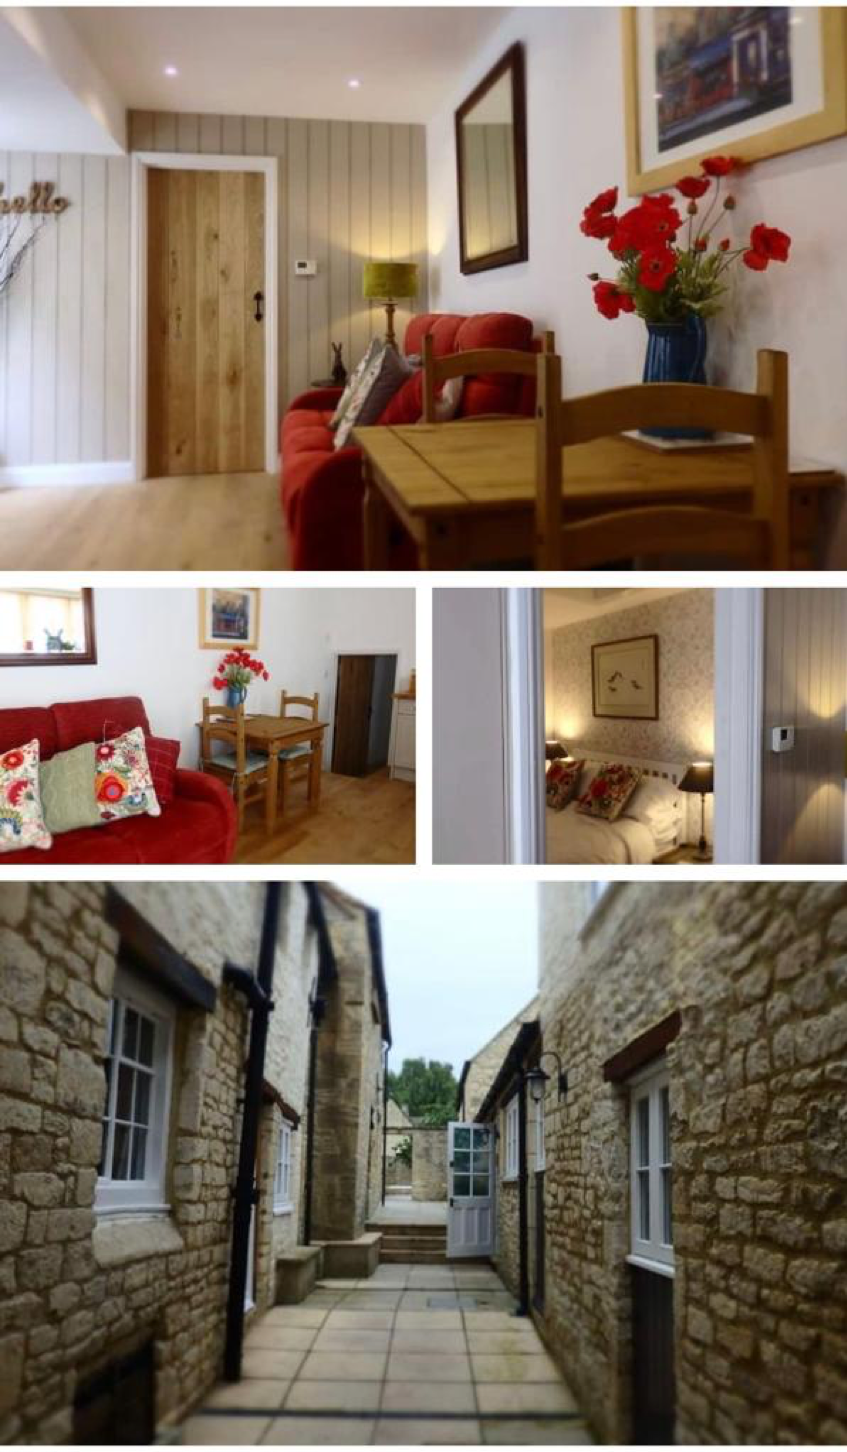 2 night stay in The Snug, 152 The Hill, Burford